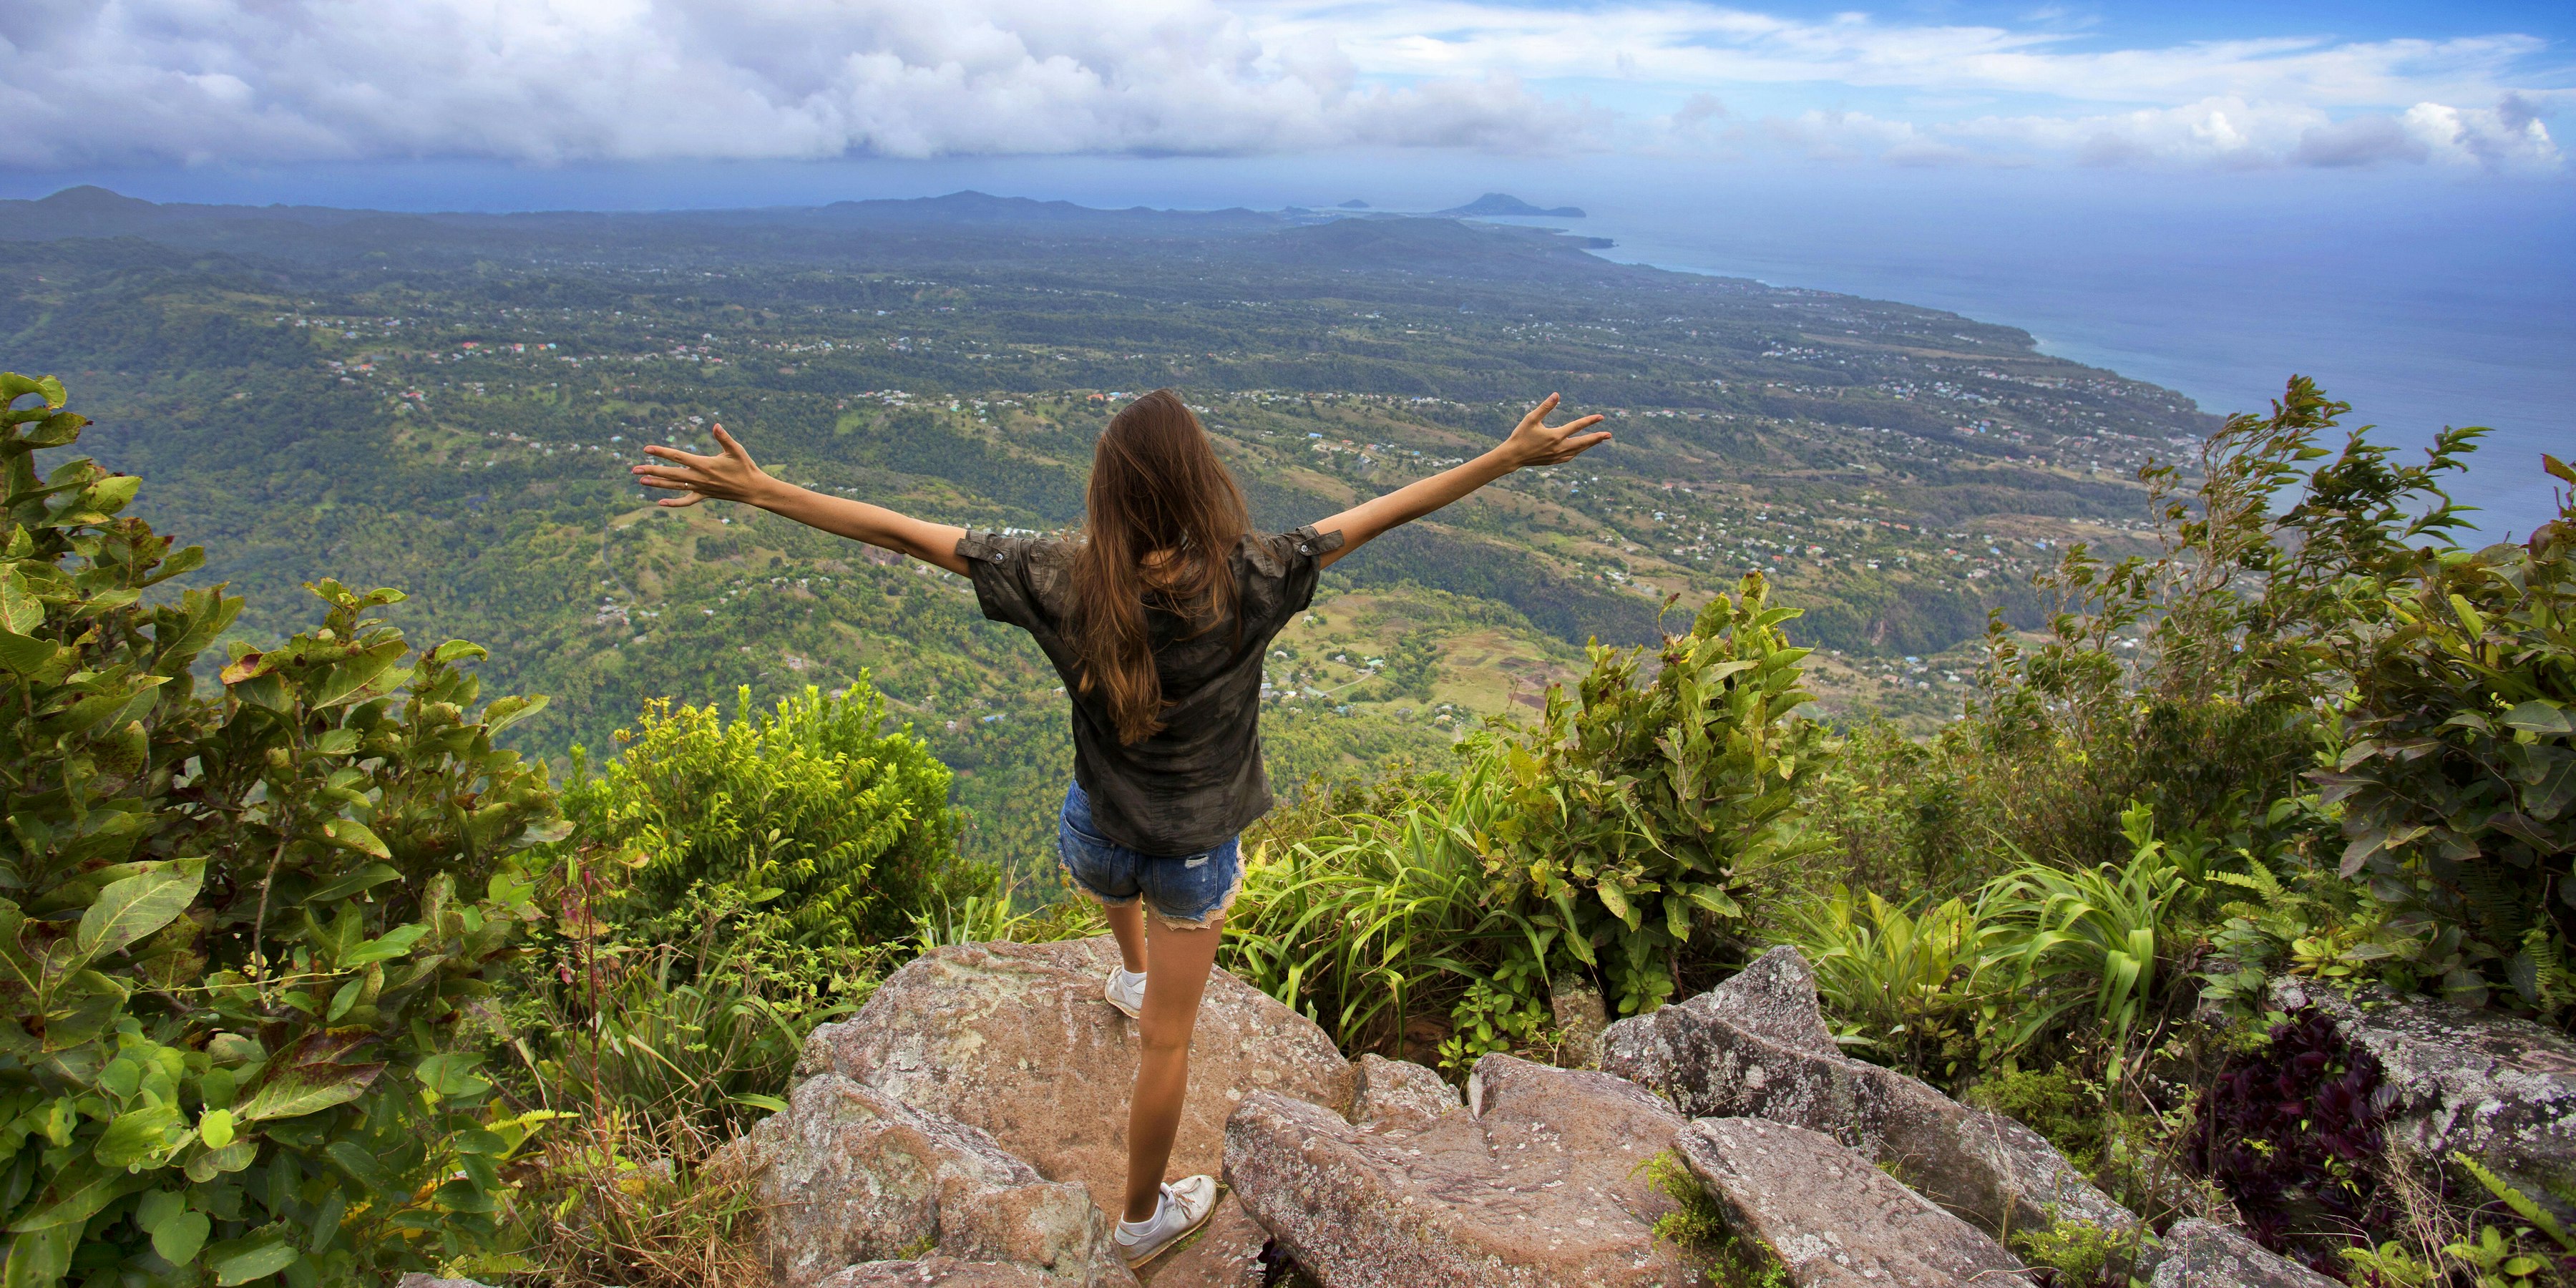 6 Best Cruise Ports for Hiking in the Caribbean - Image X 21.jpg?auto=format&fit=crop&crop=focalpoint&ar=2:1&ixlib=react 9.0